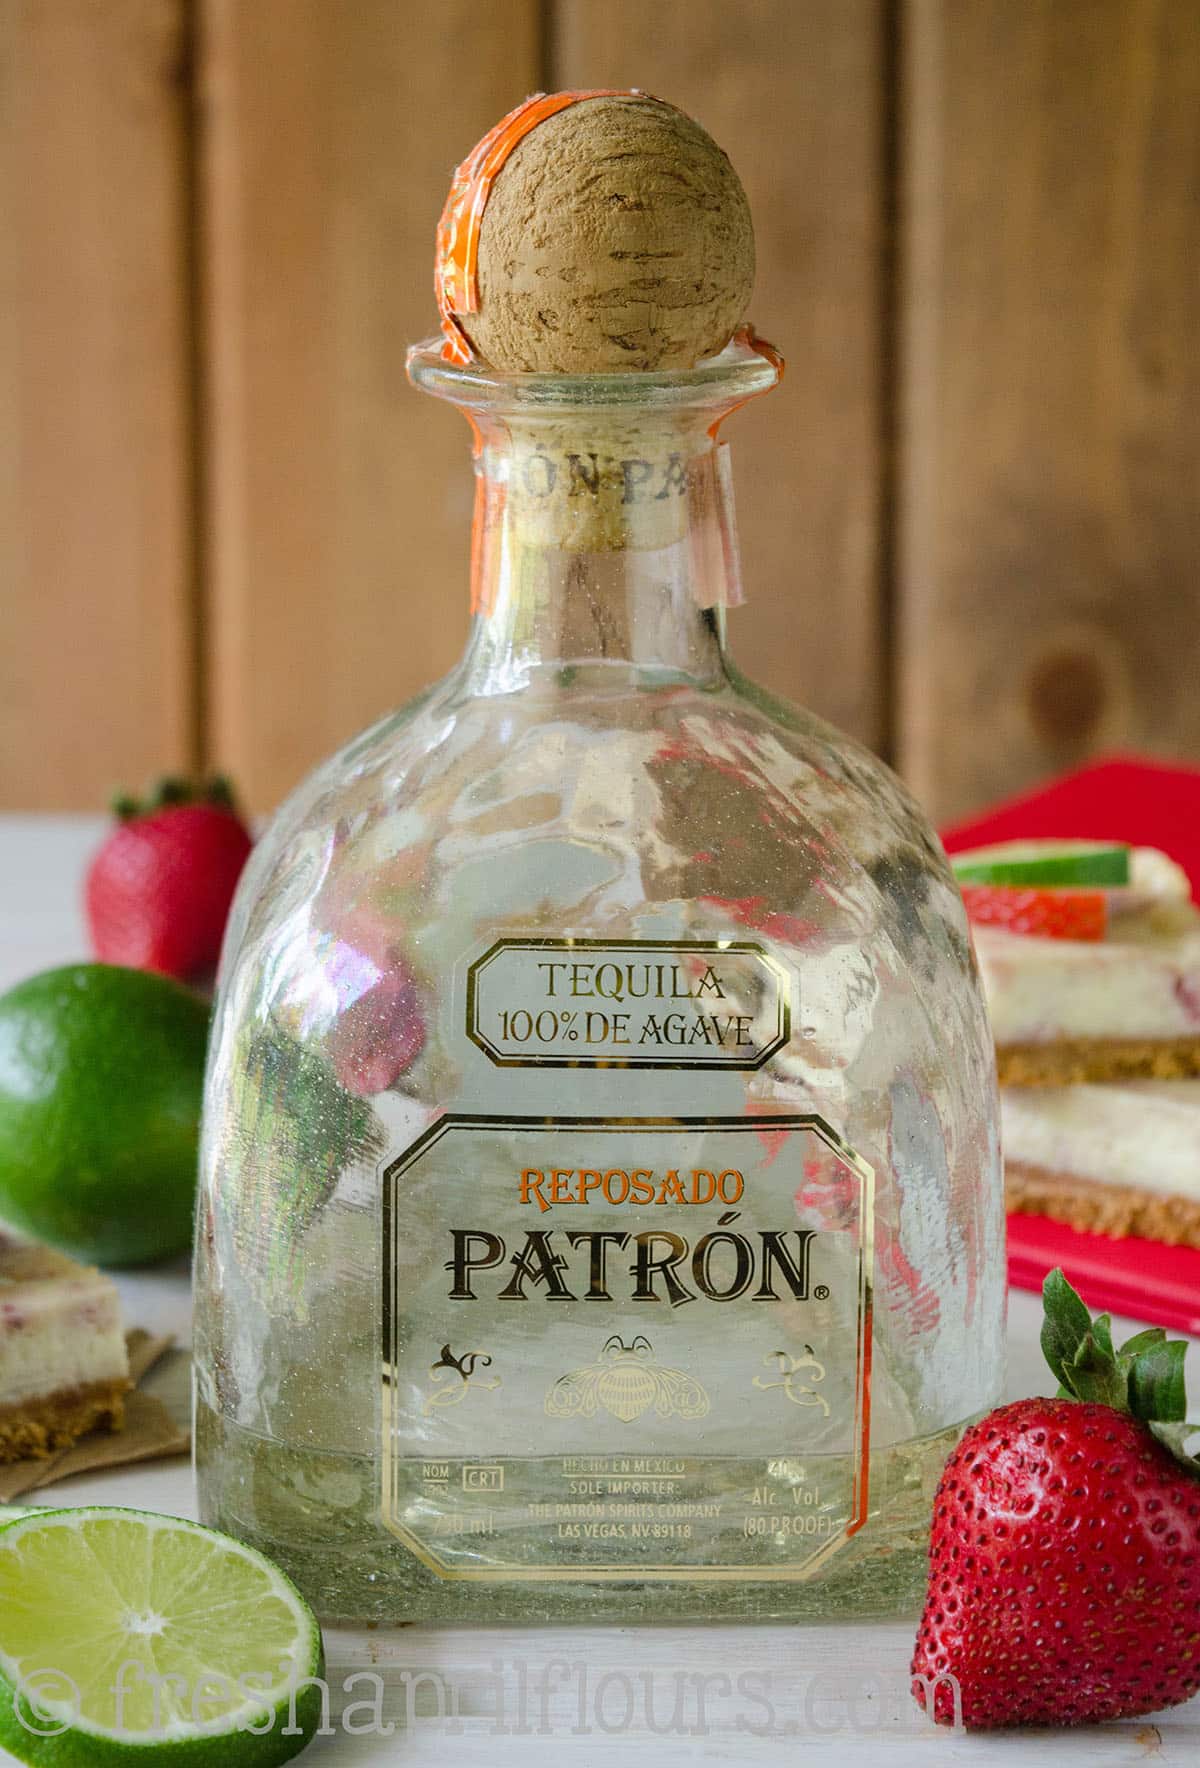 Bottle of Patron tequila.